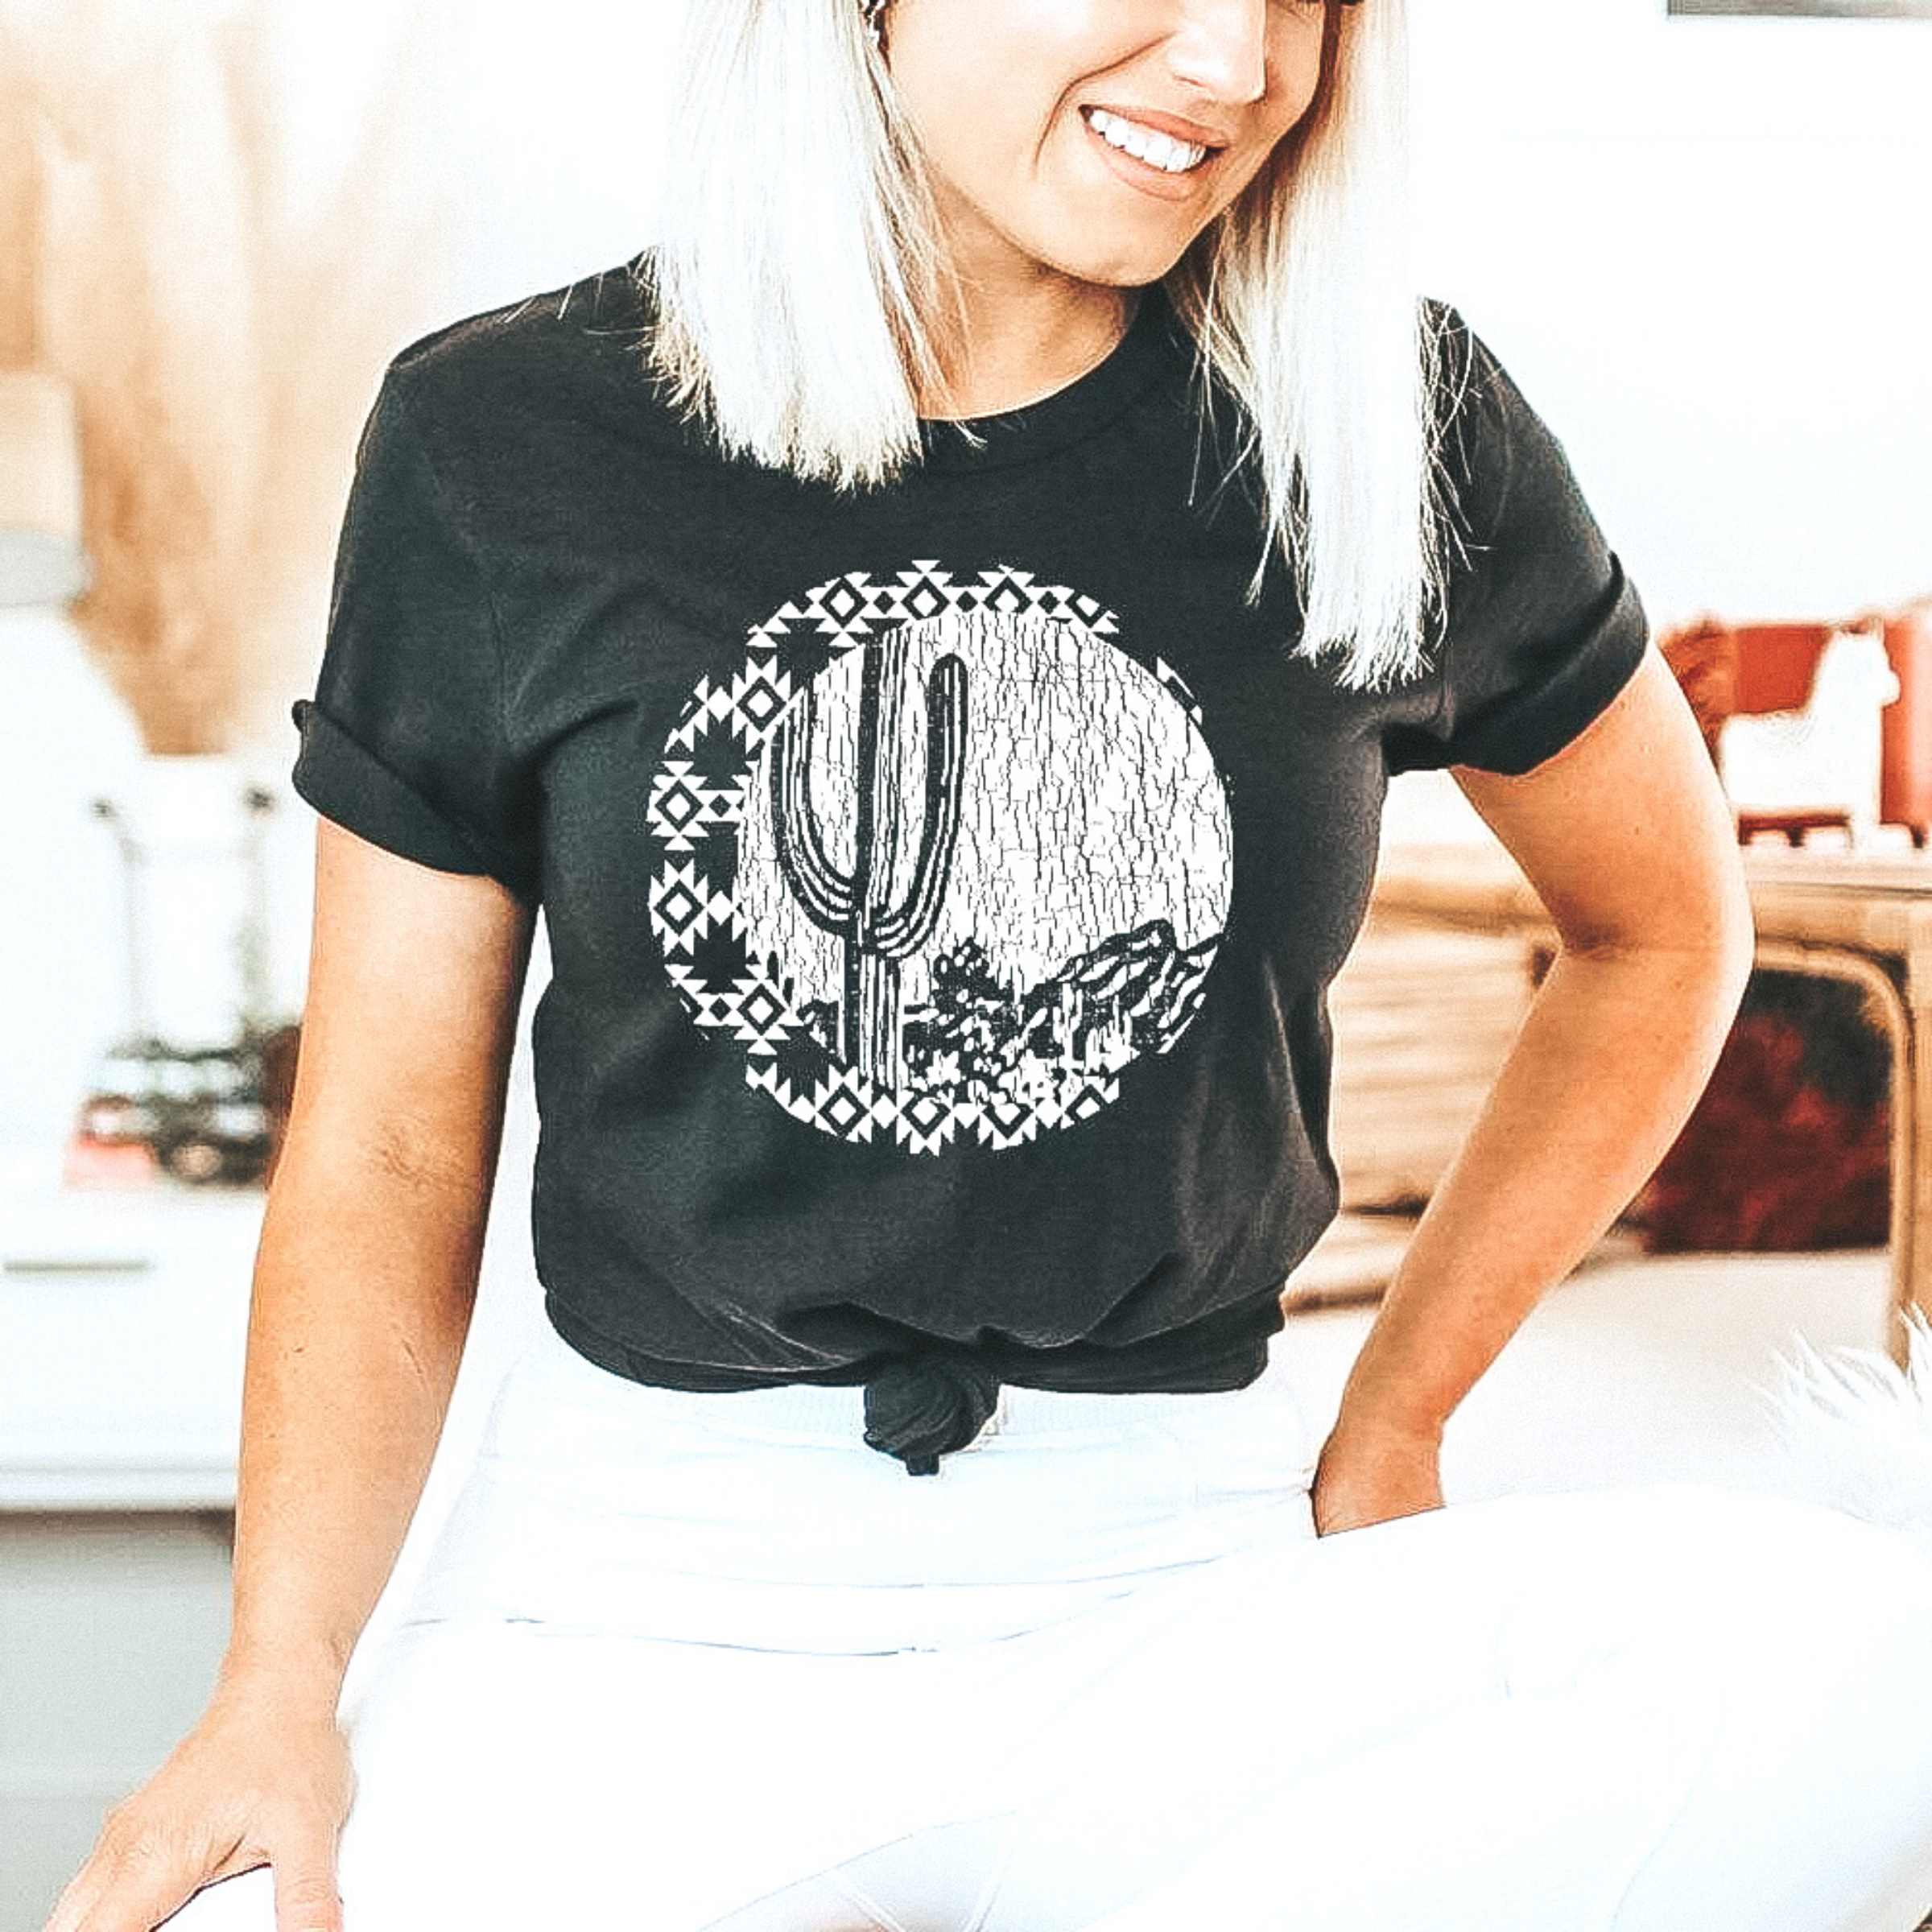 Black graphic tee with saguaro cactus, mountains in background and chipped print skyline.  The graphic has an aztec design surounding. Blonde model has paired back with white leggings.